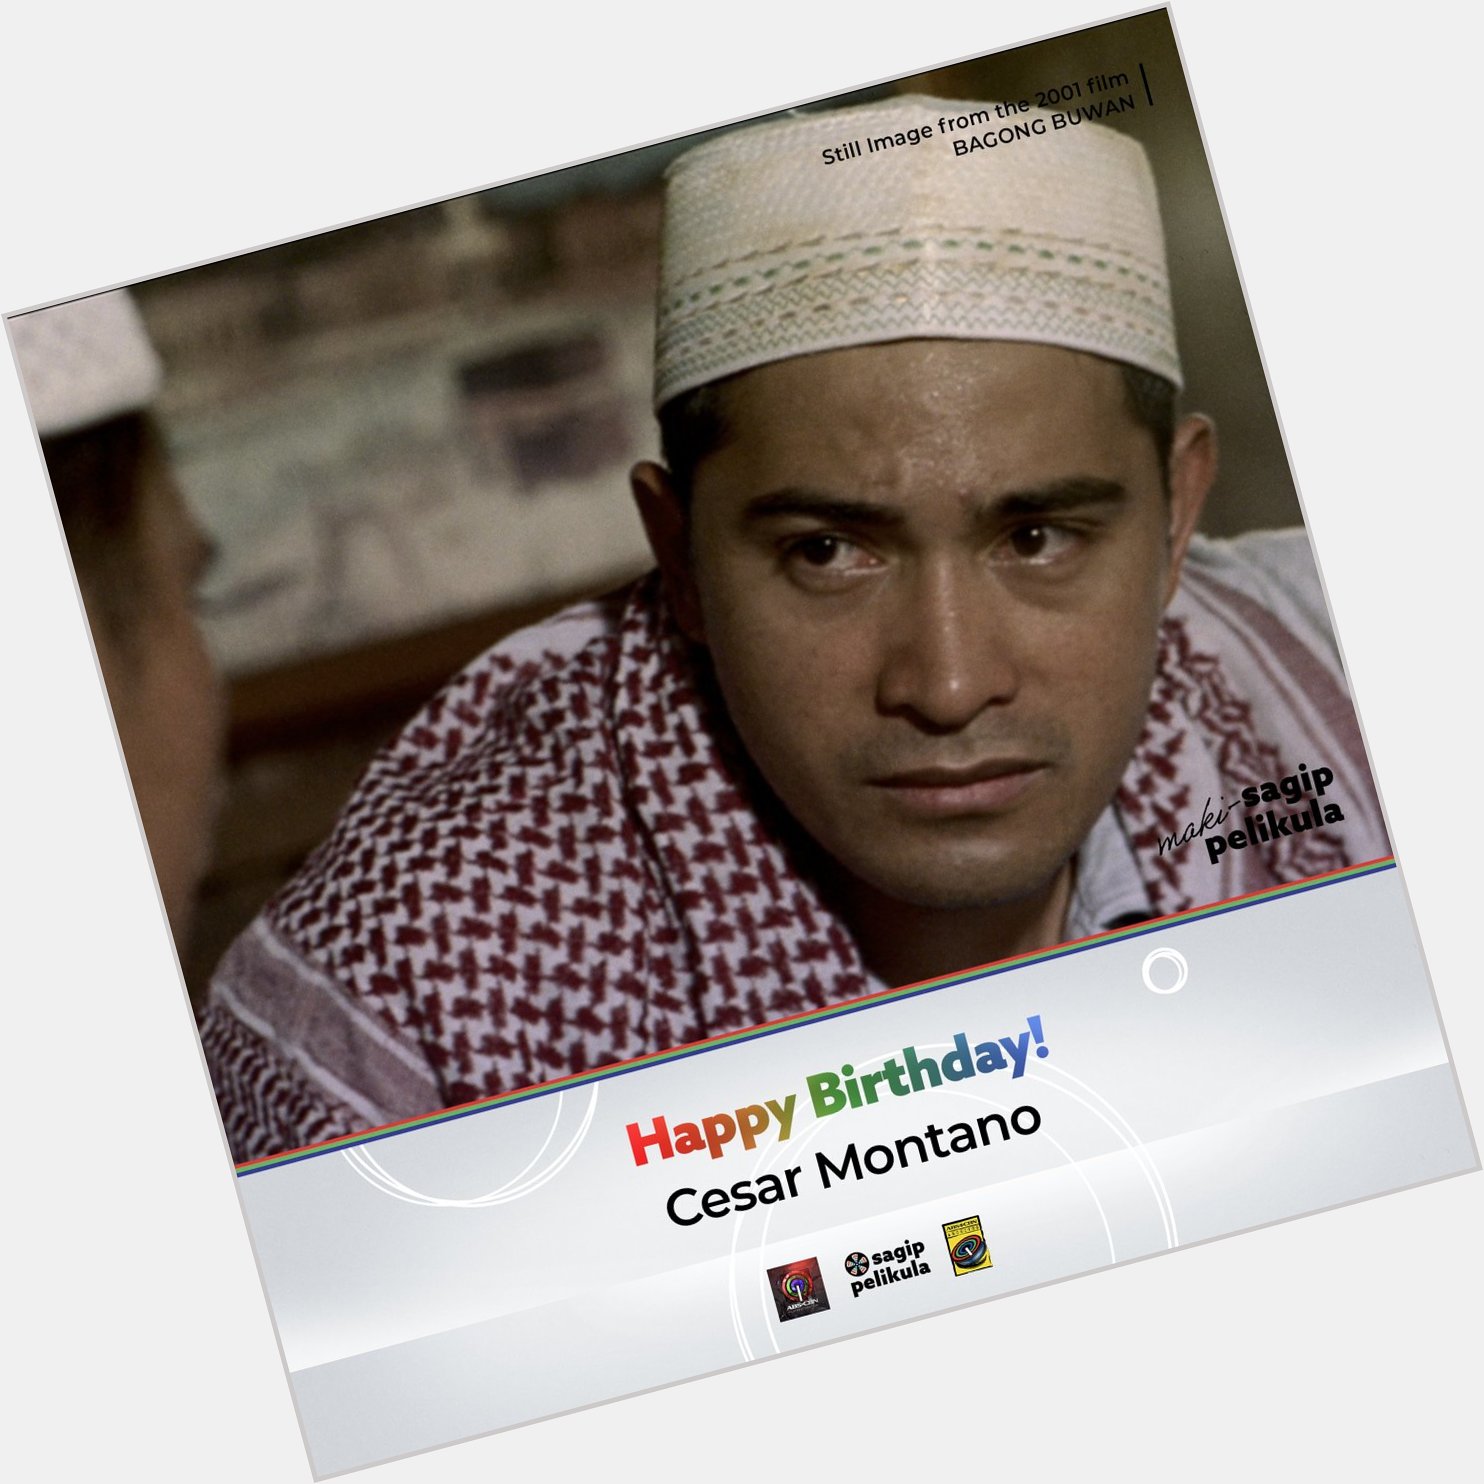 Happy birthday to Cesar Montano!

What\s your favorite film of his?  